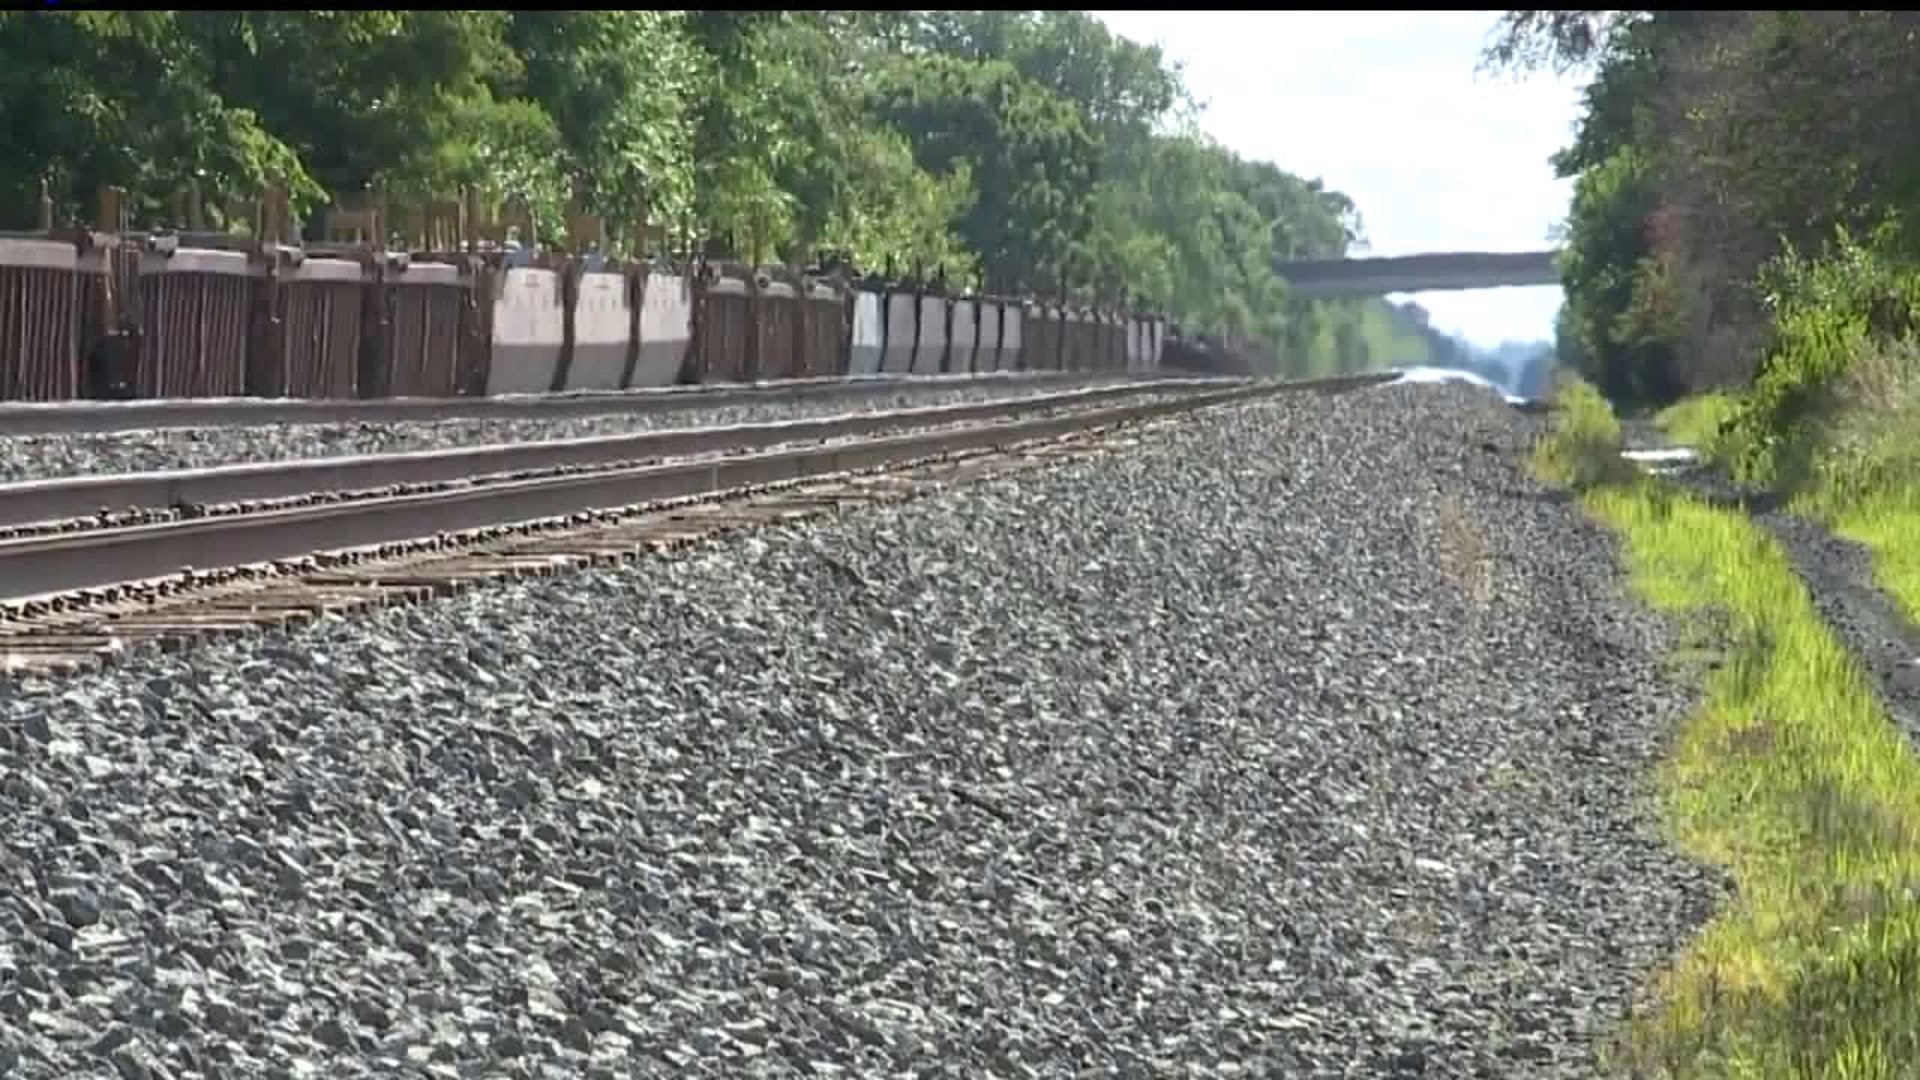 Police investigating after a man is hit and killed by Norfolk Southern train in Lebanon County